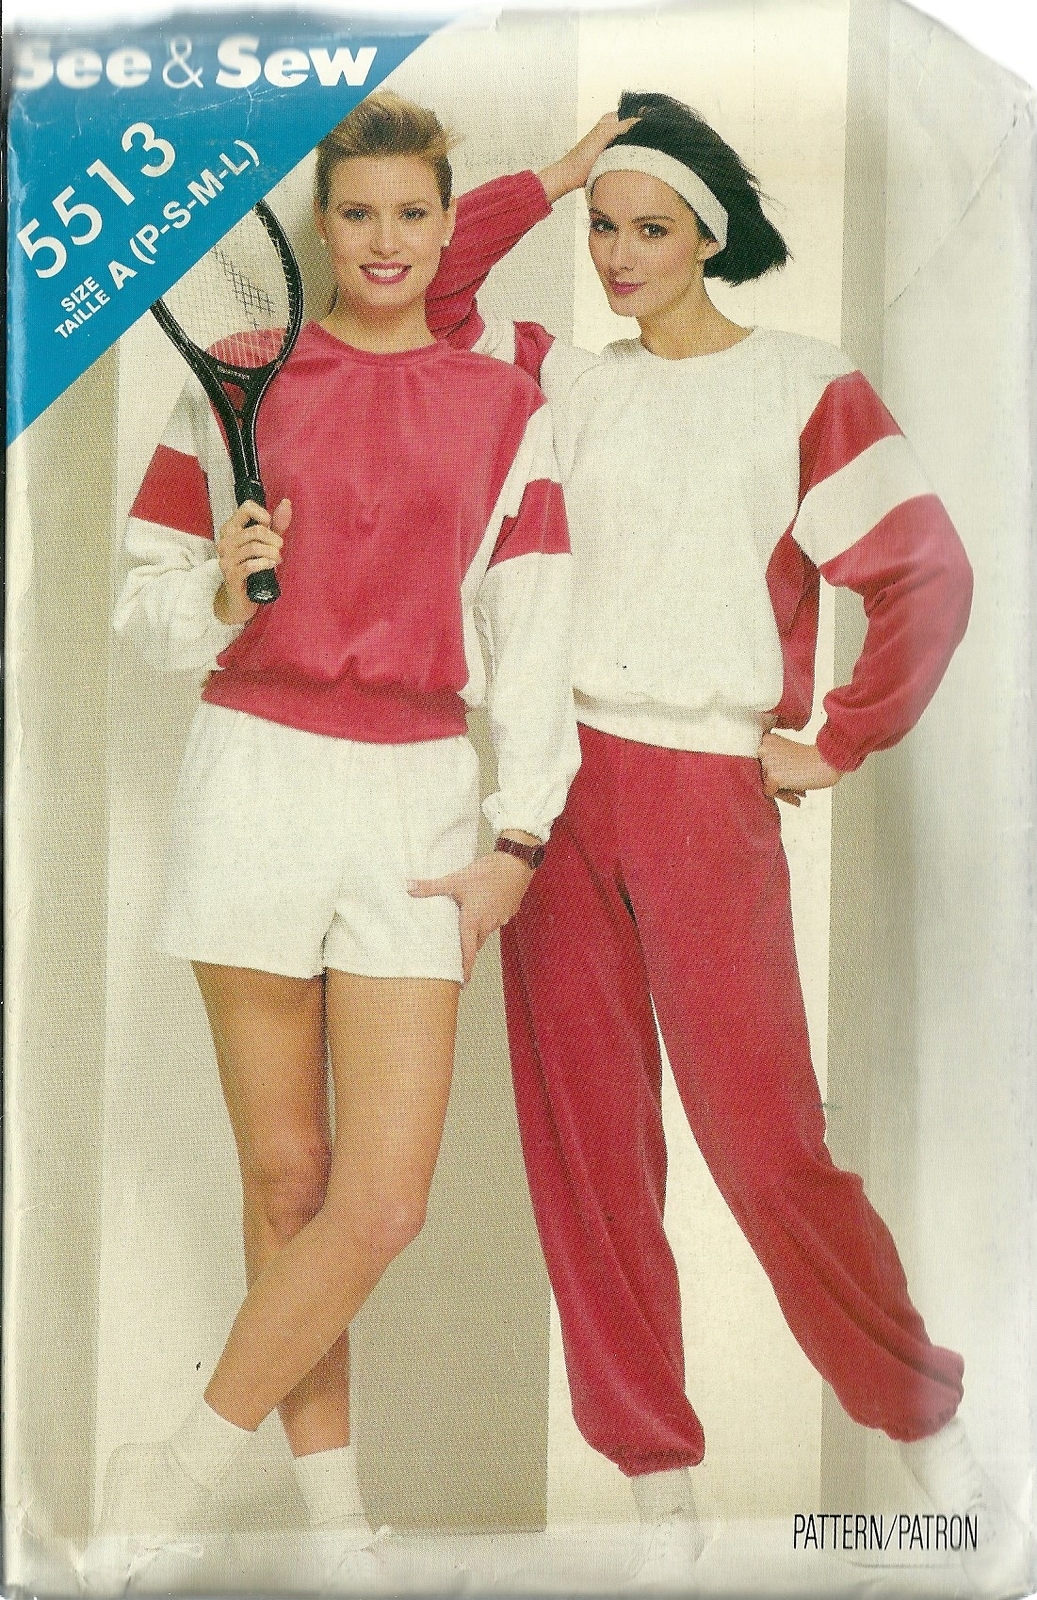 See And Sew Sewing Pattern 5513 Misses Womens Top Pants Shorts Size P S M L New - $9.99